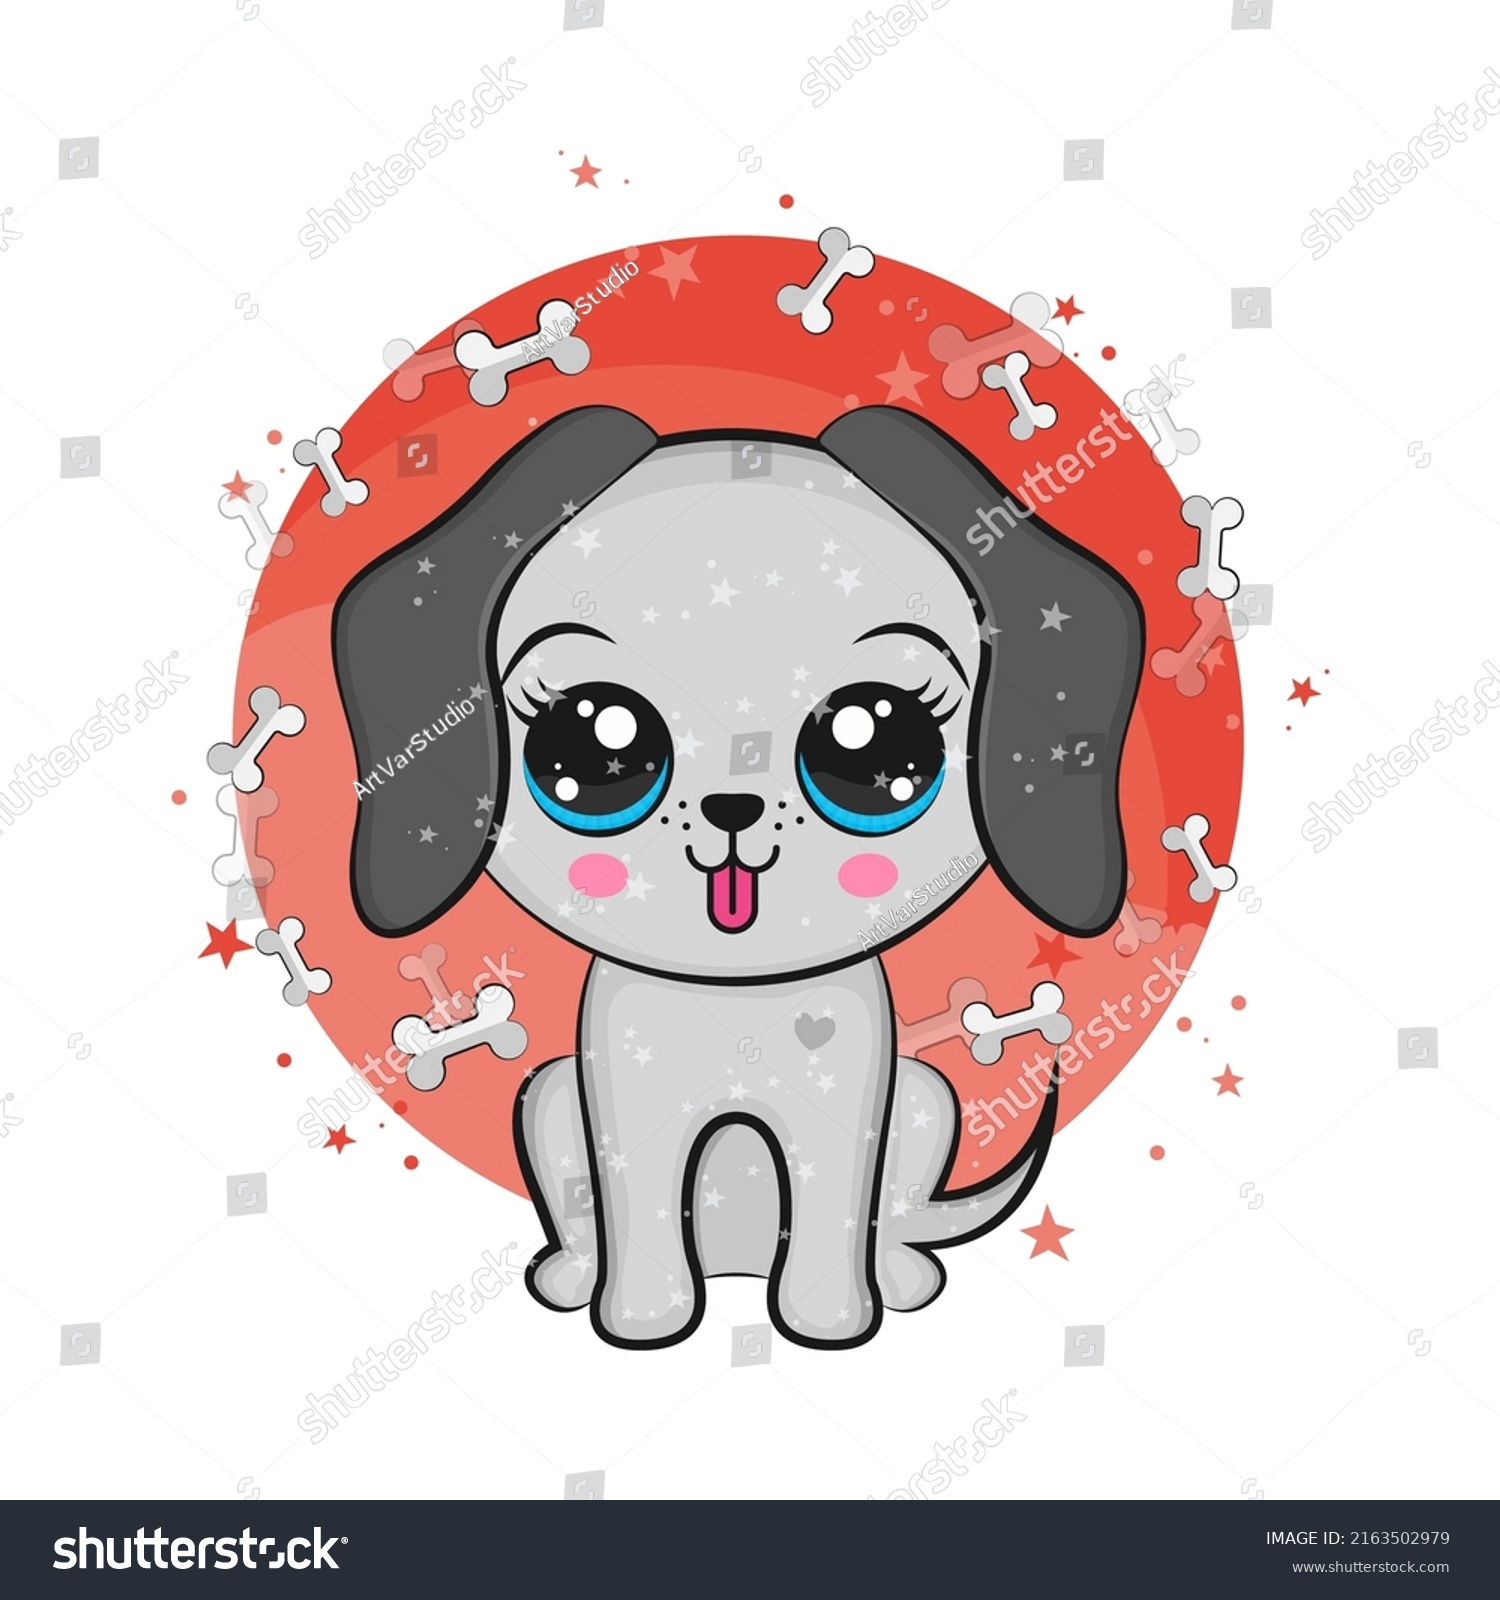 SVG of Cartoon dog on a background with bones. Vector illustration of an animal. Cute illustration of animal for kids, baby book, fairy tales, baby shower invitation, textile t-shirt, sticker. svg